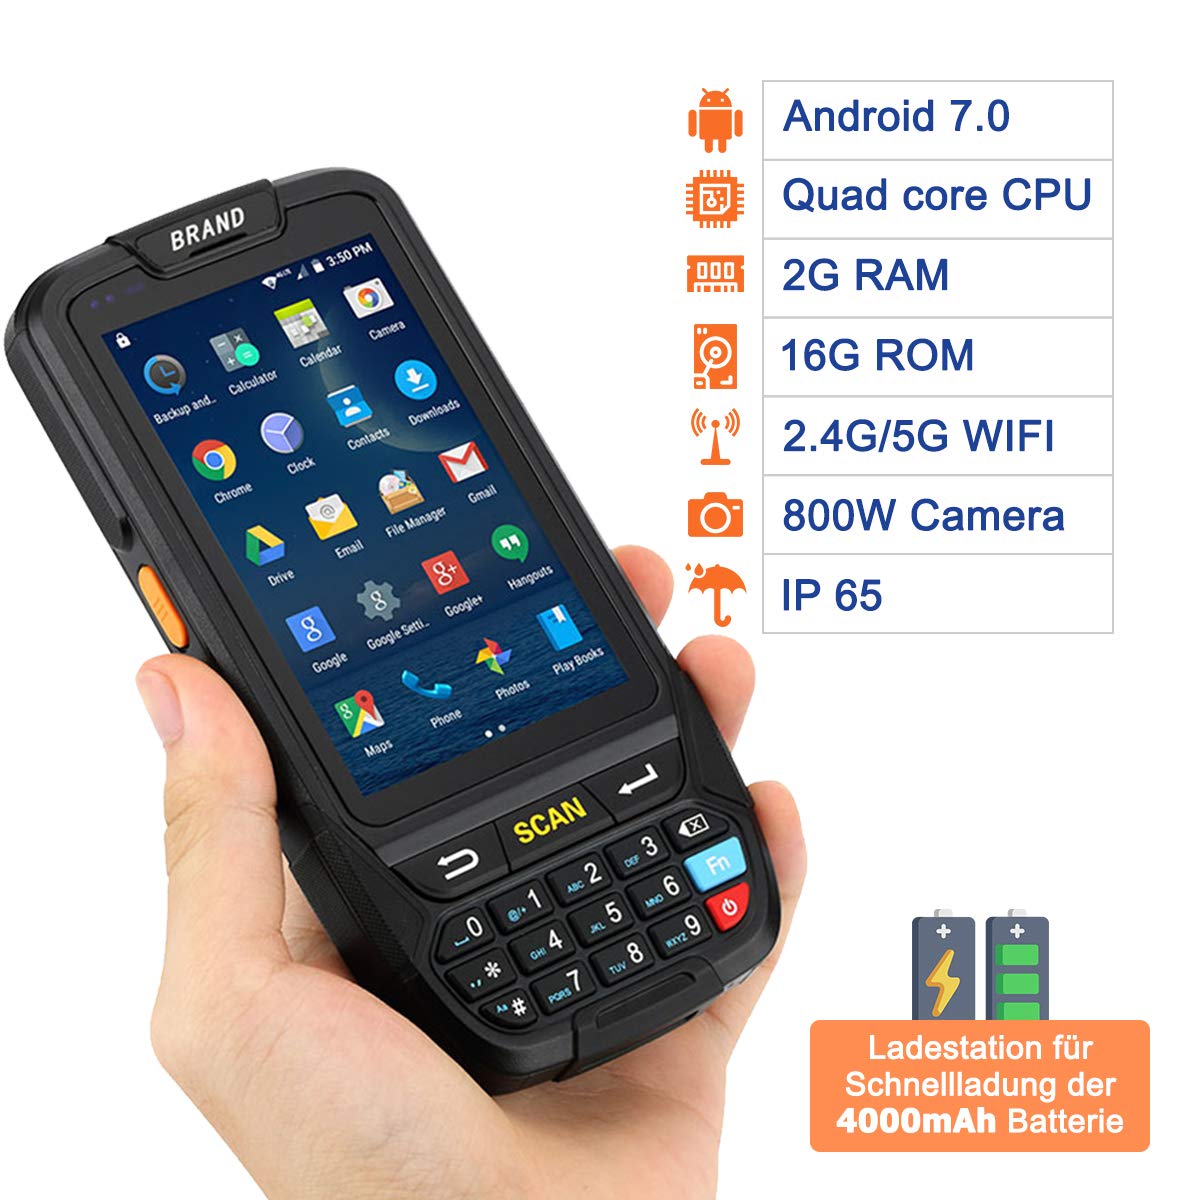 Android Scanner MUNBYN Rugged Handheld Mobile Terminal with Android 7.0